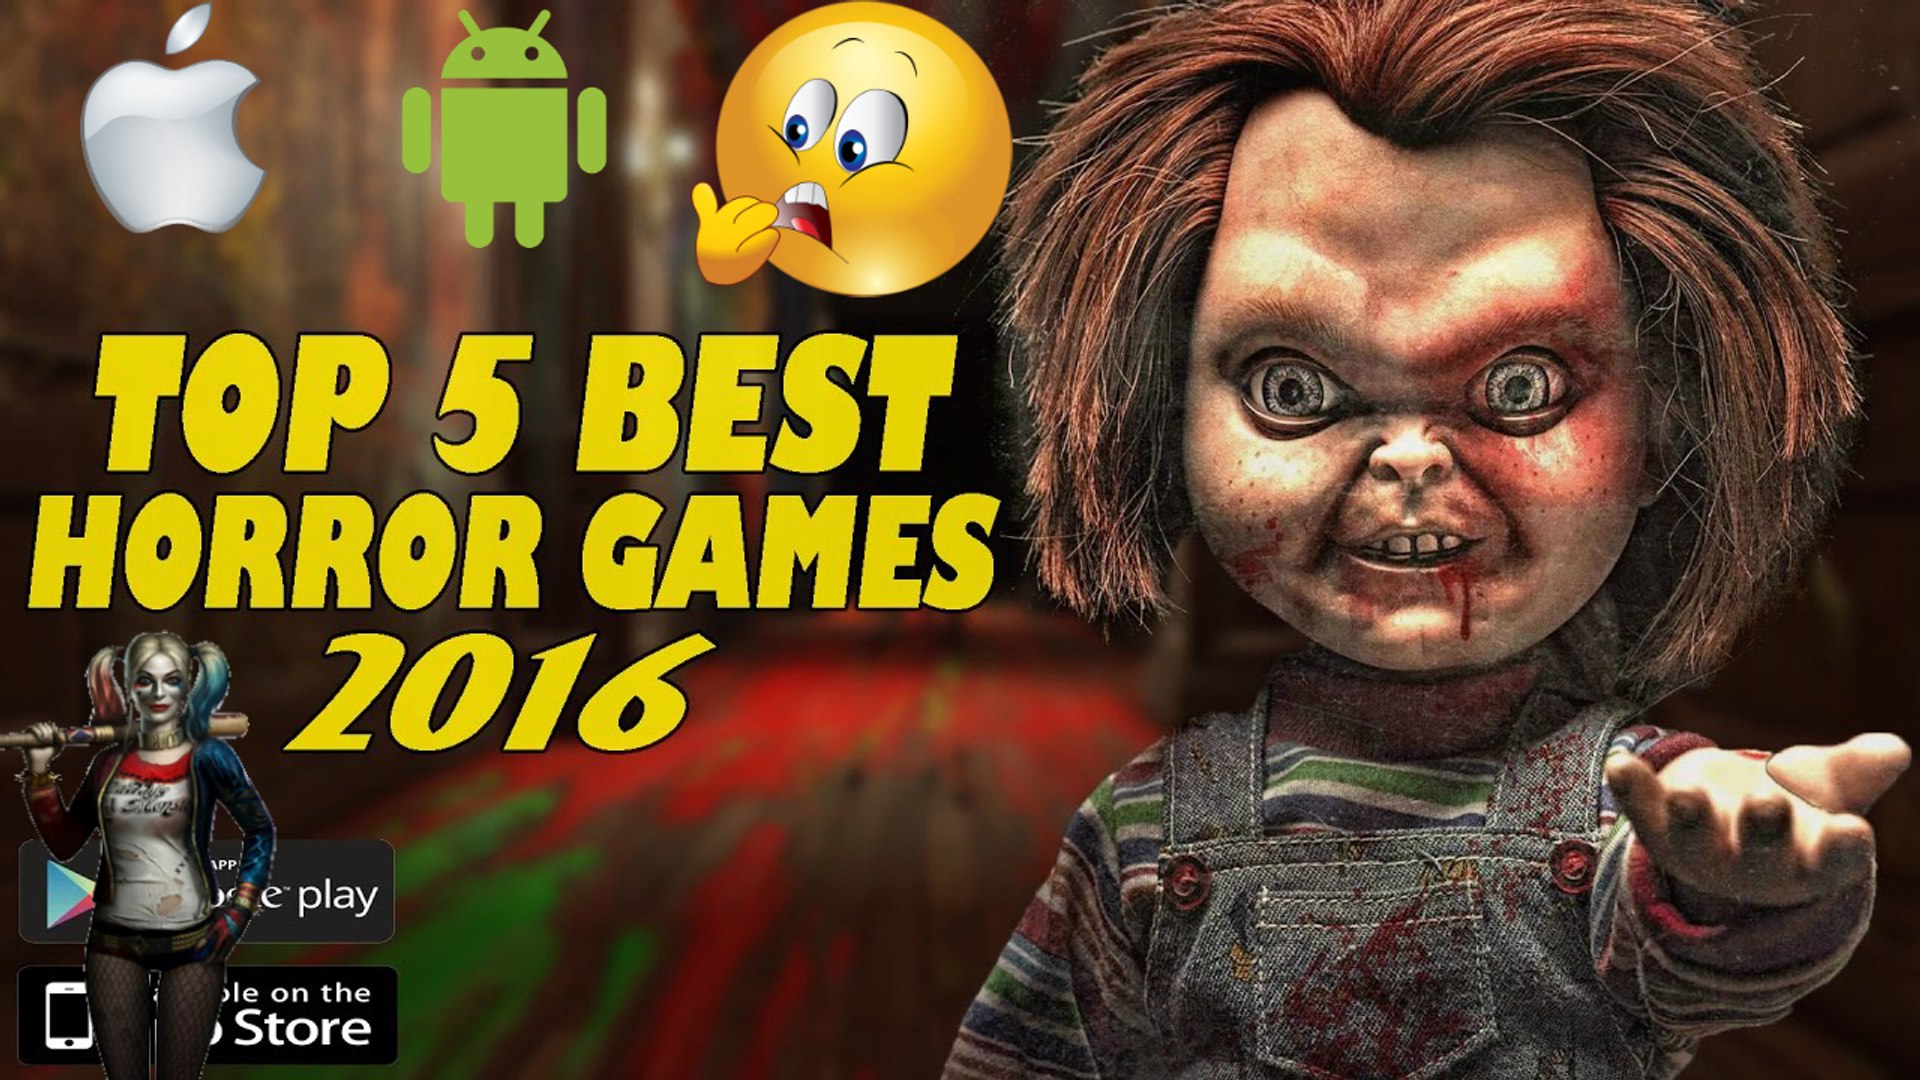 Top 5 Best New Horror Games for Android/iOS in 2016/2017 - فيديو Dailymotion